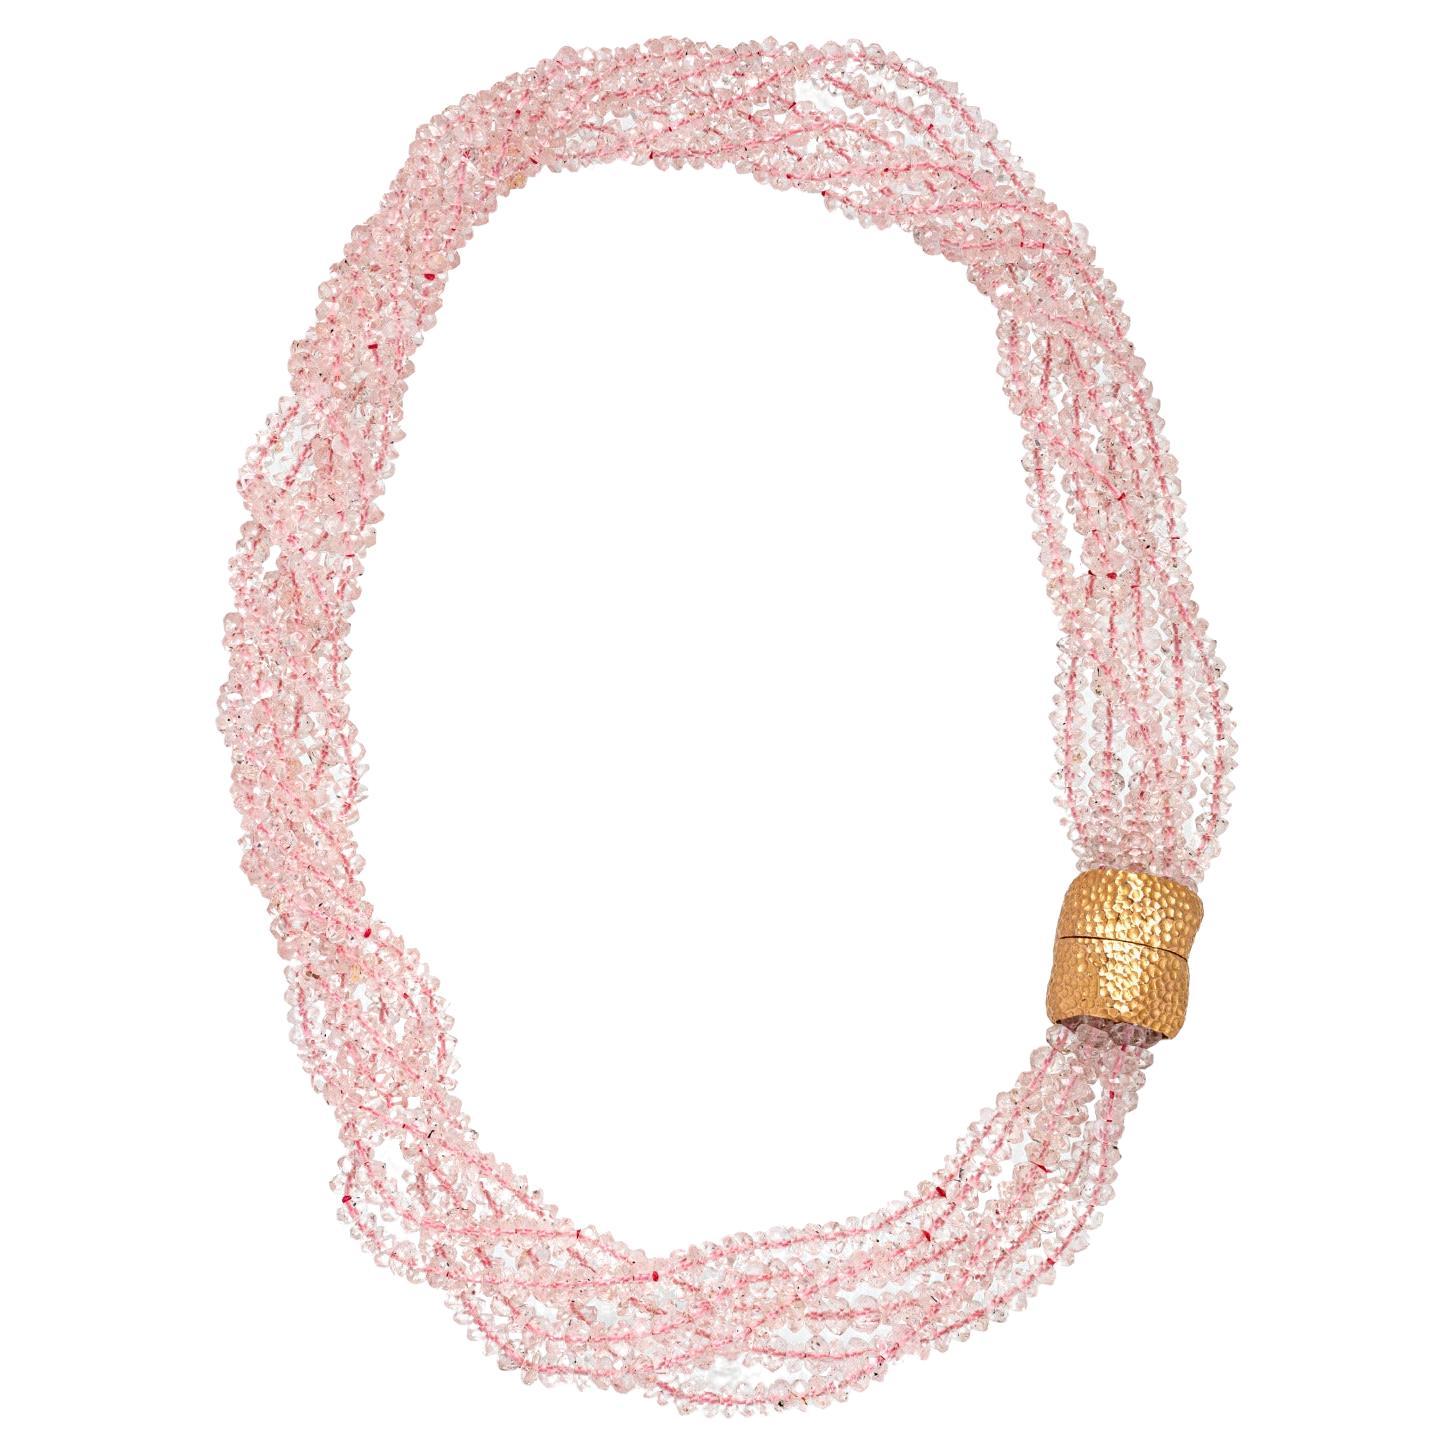 Faceted Morganite Bead Necklace with 18 Karat Rose Gold Clasp, by Gloria Bass For Sale